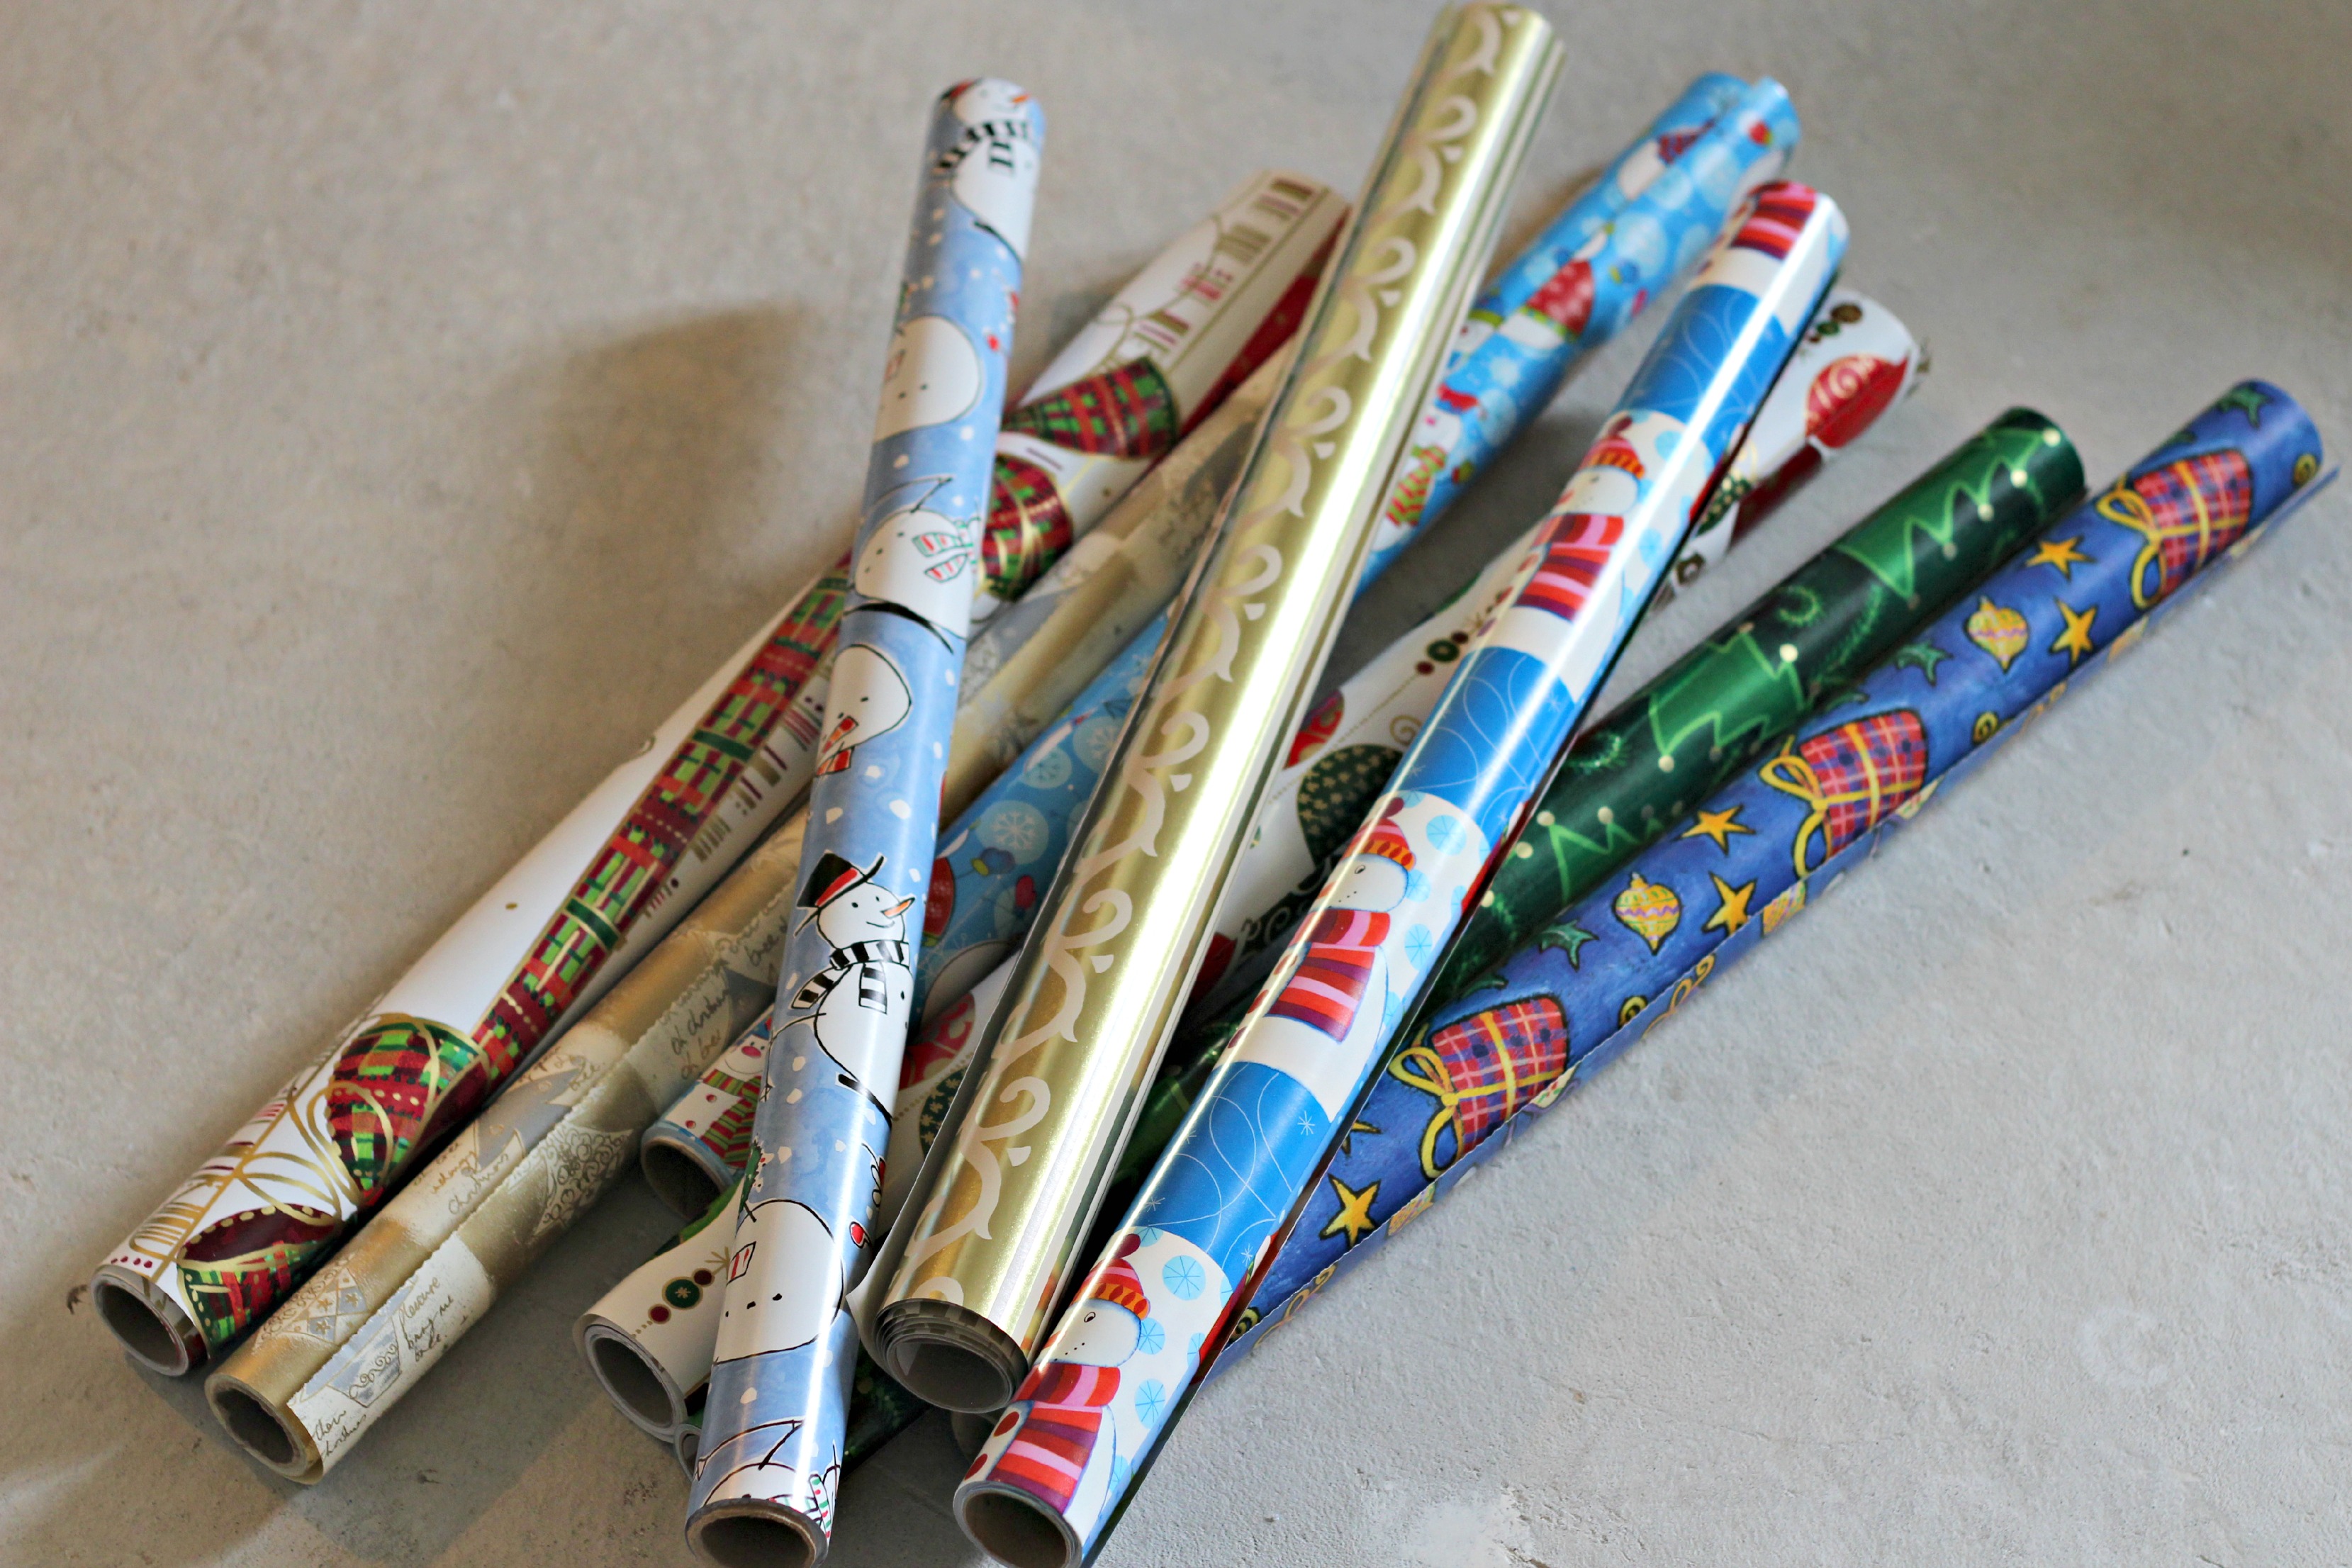 Two Gift Wrap Organizing Tips